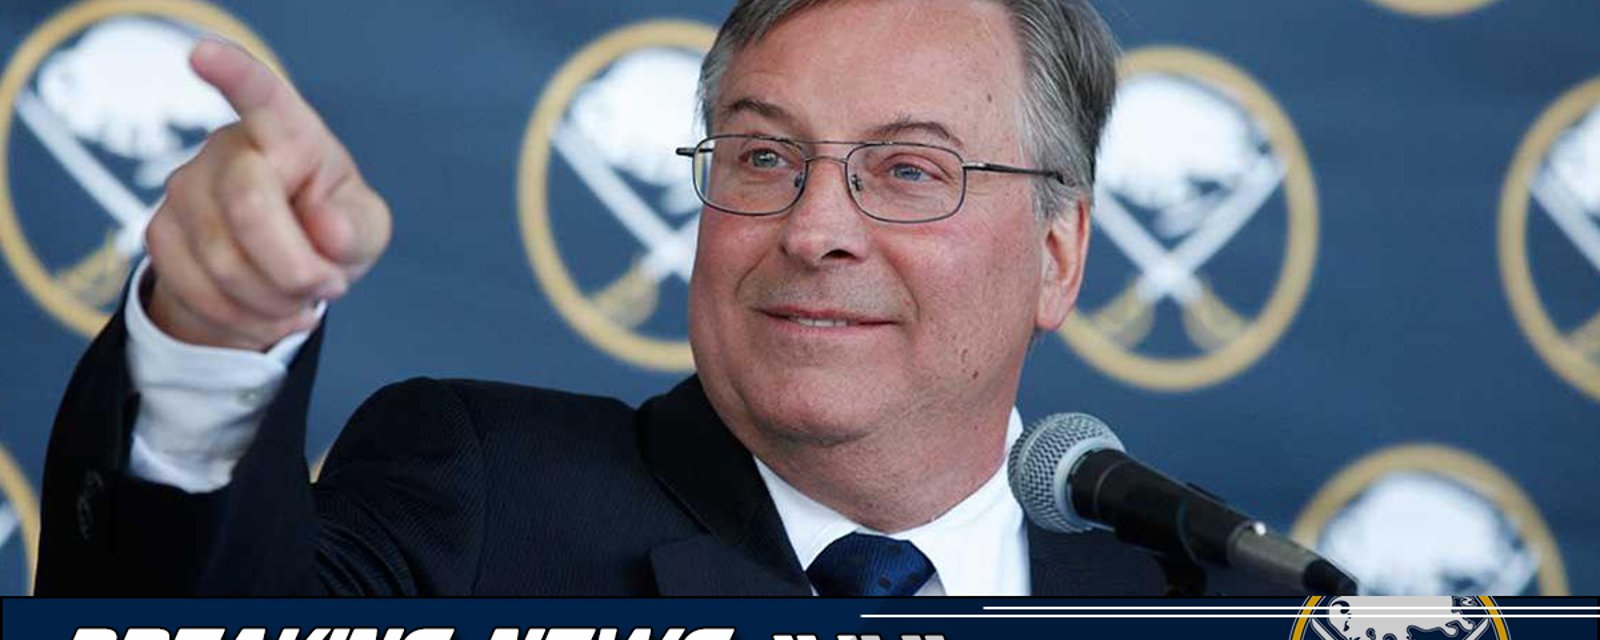 BREAKING: Buffalo make it official and confirms their new GM!